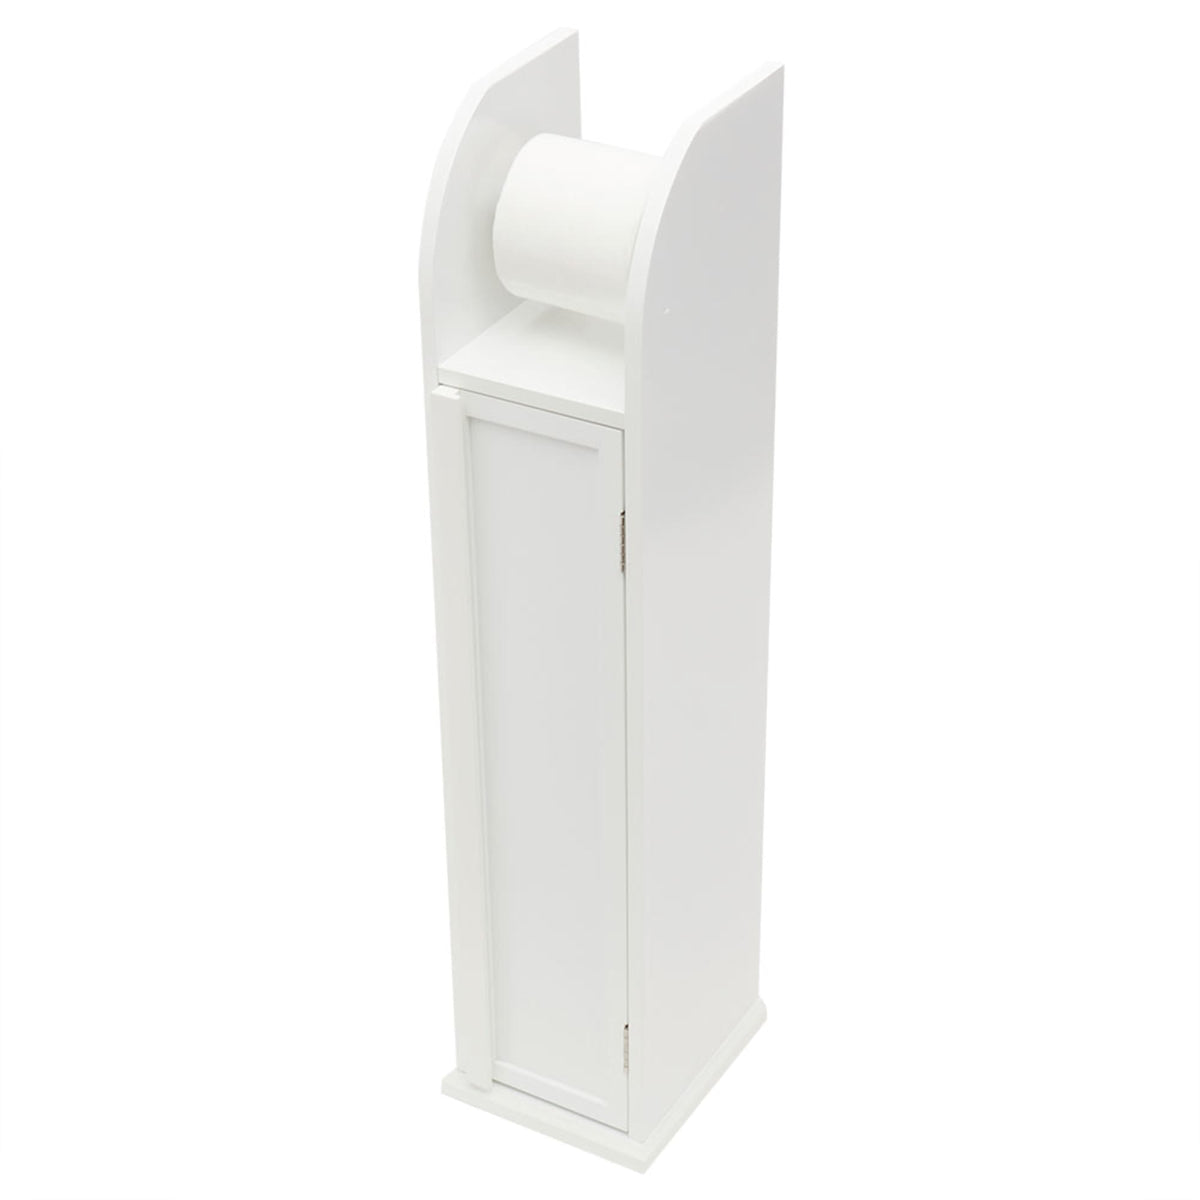 Home Basics White 2-Tier Cabinet With Toilet Paper Holder